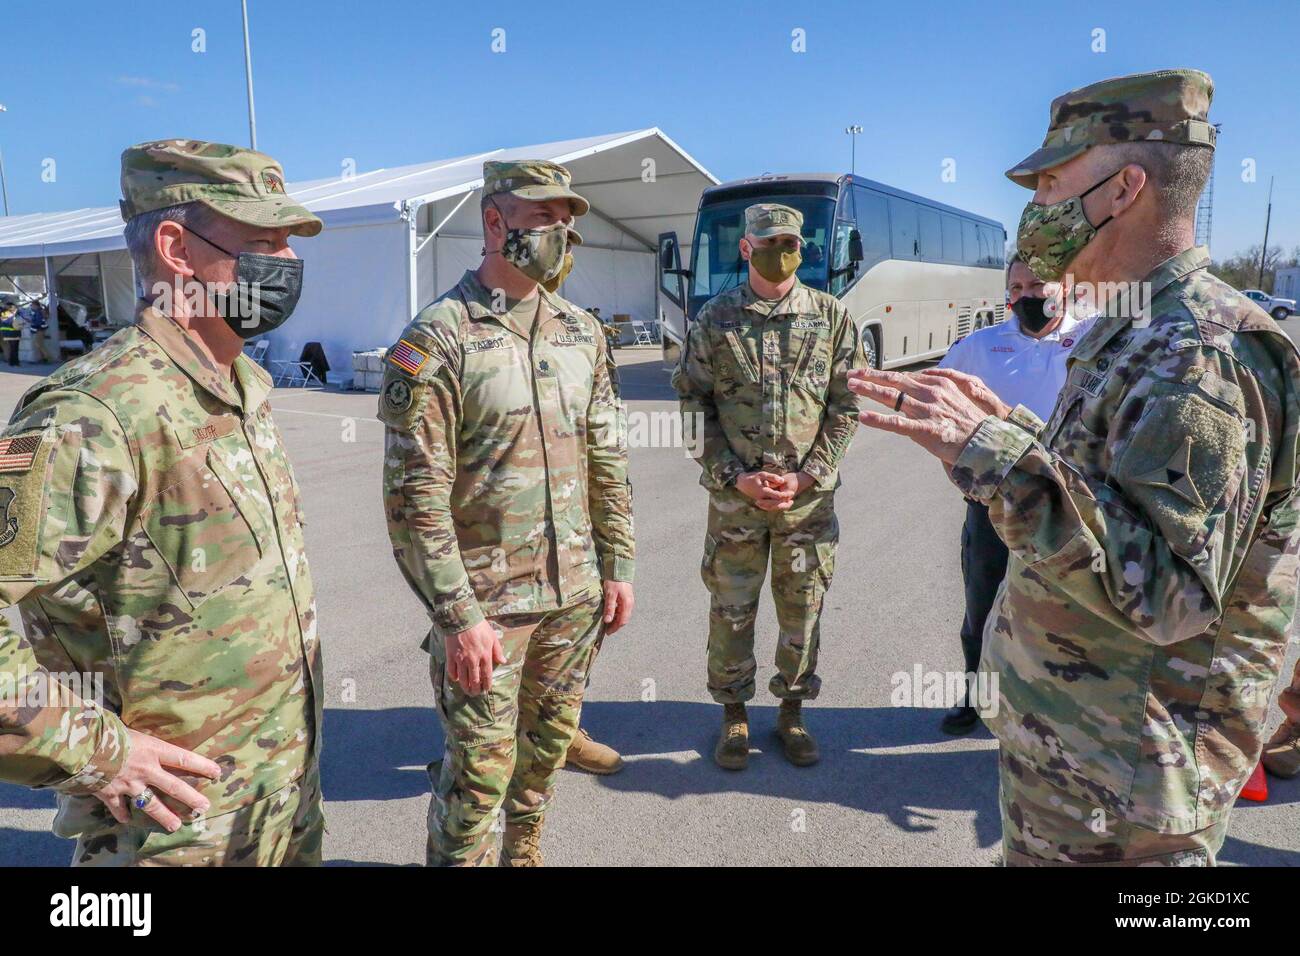 U.S. Air Force Maj. Gen. Thomas M. Suelzer, left, the Assistant Adjutant General-Air for the Texas National Guard, and U.S. Army Lt. Col. Nicholas Talbot, center left, commander of 1st Combined Arms Battalion, 63rd Armor Regiment, 2nd Armored Brigade Combat Team, 1st Infantry Division, speak to U.S. Army Lt. Gen. Robert “Pat” White, right, III Armored Corps and Fort Hood, Texas, commanding general, at the Fair Park Community Vaccination Center (CVC) in Dallas, March 17, 2021. The officers discussed CVC operations and the Department of Defenses’ role in assisting the Federal Emergency Managemen Stock Photo